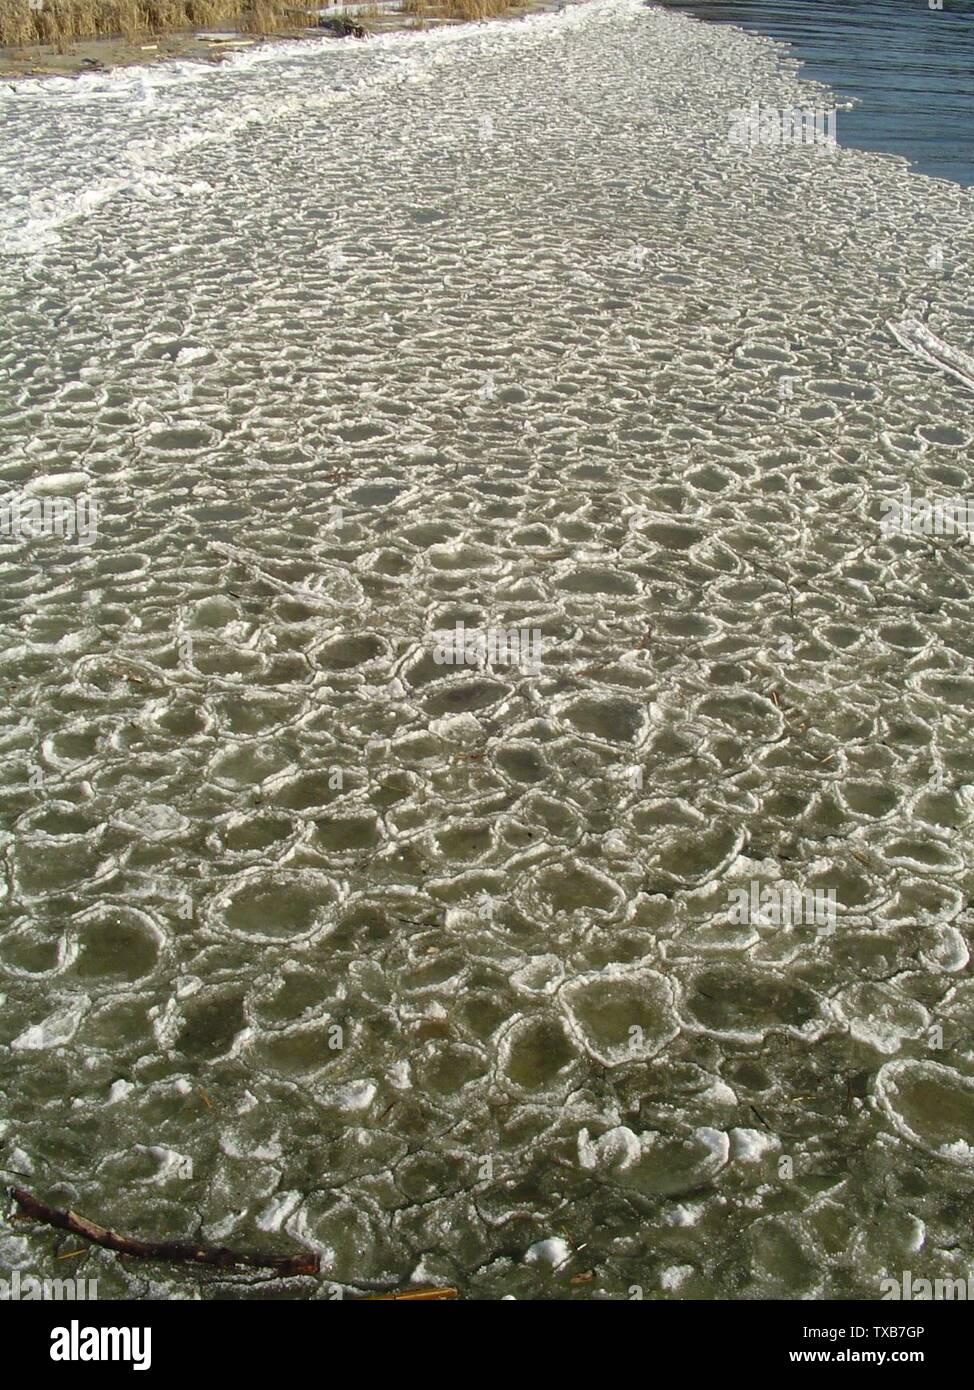 Pancake ice formed by alternating above/below freezing temperatures and wave action at the mouth of the Winooski river, Burlington, Vermont, USA; 10 December 2006; photo taken by Josh Bongard Original: en.pedia 22:39, 2006-12-10 . . 1,224Ã—1,632 (813 KB) . . Josh bongard . . (Author: Josh Bongard Source: myself); Josh Bongard (Josh bongard); Stock Photo